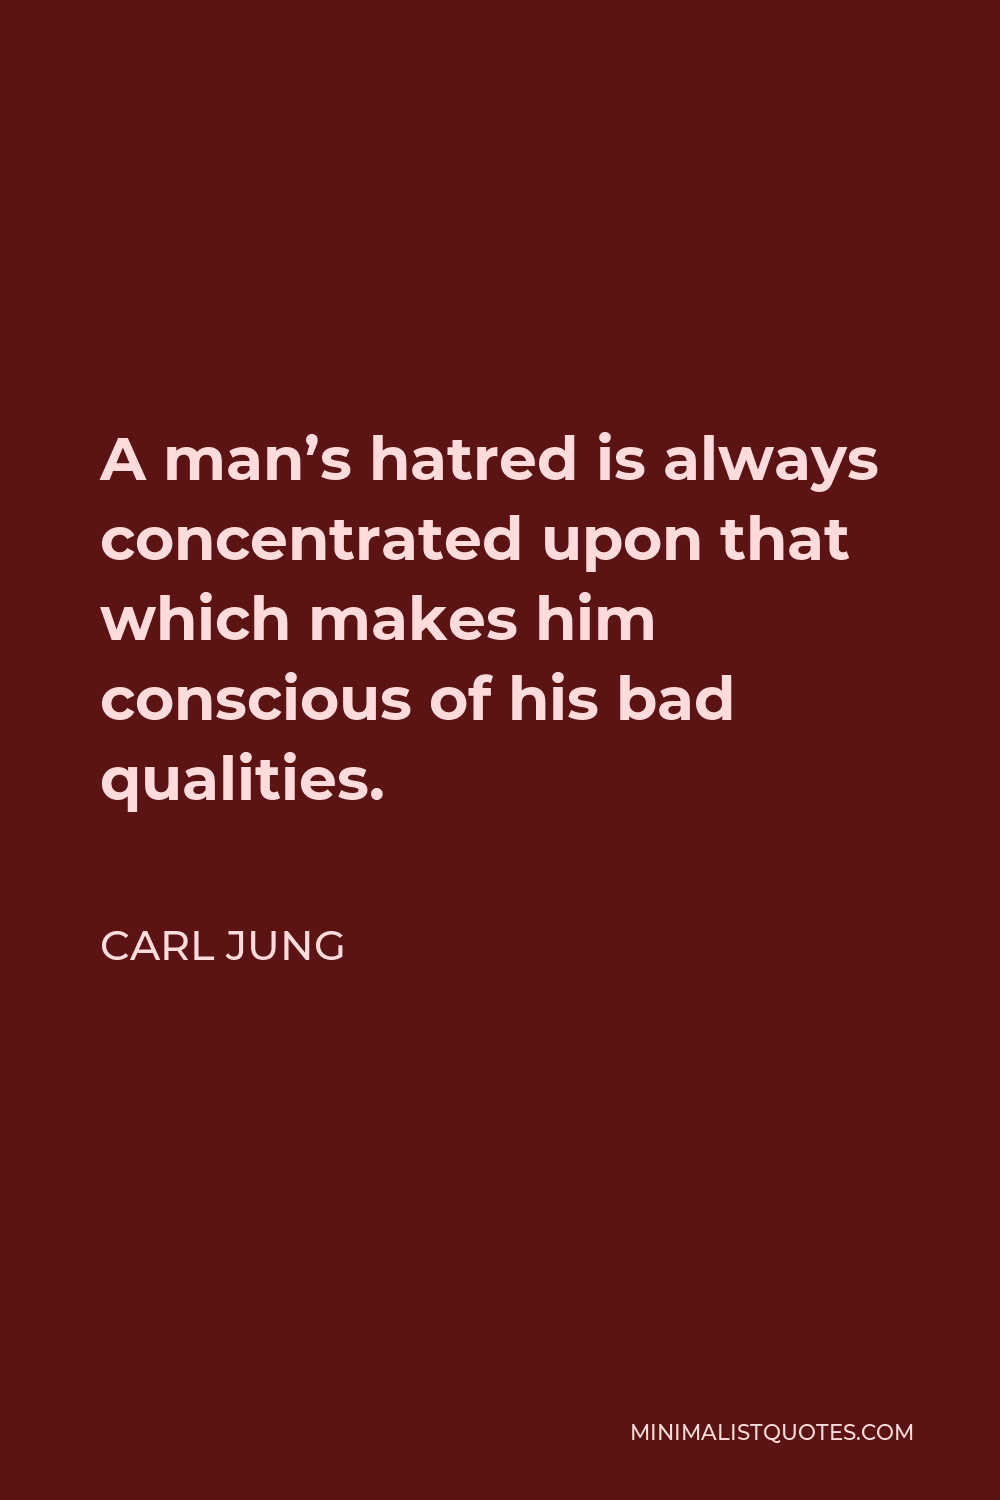 Carl Jung Quote - A man’s hatred is always concentrated upon that which makes him conscious of his bad qualities.